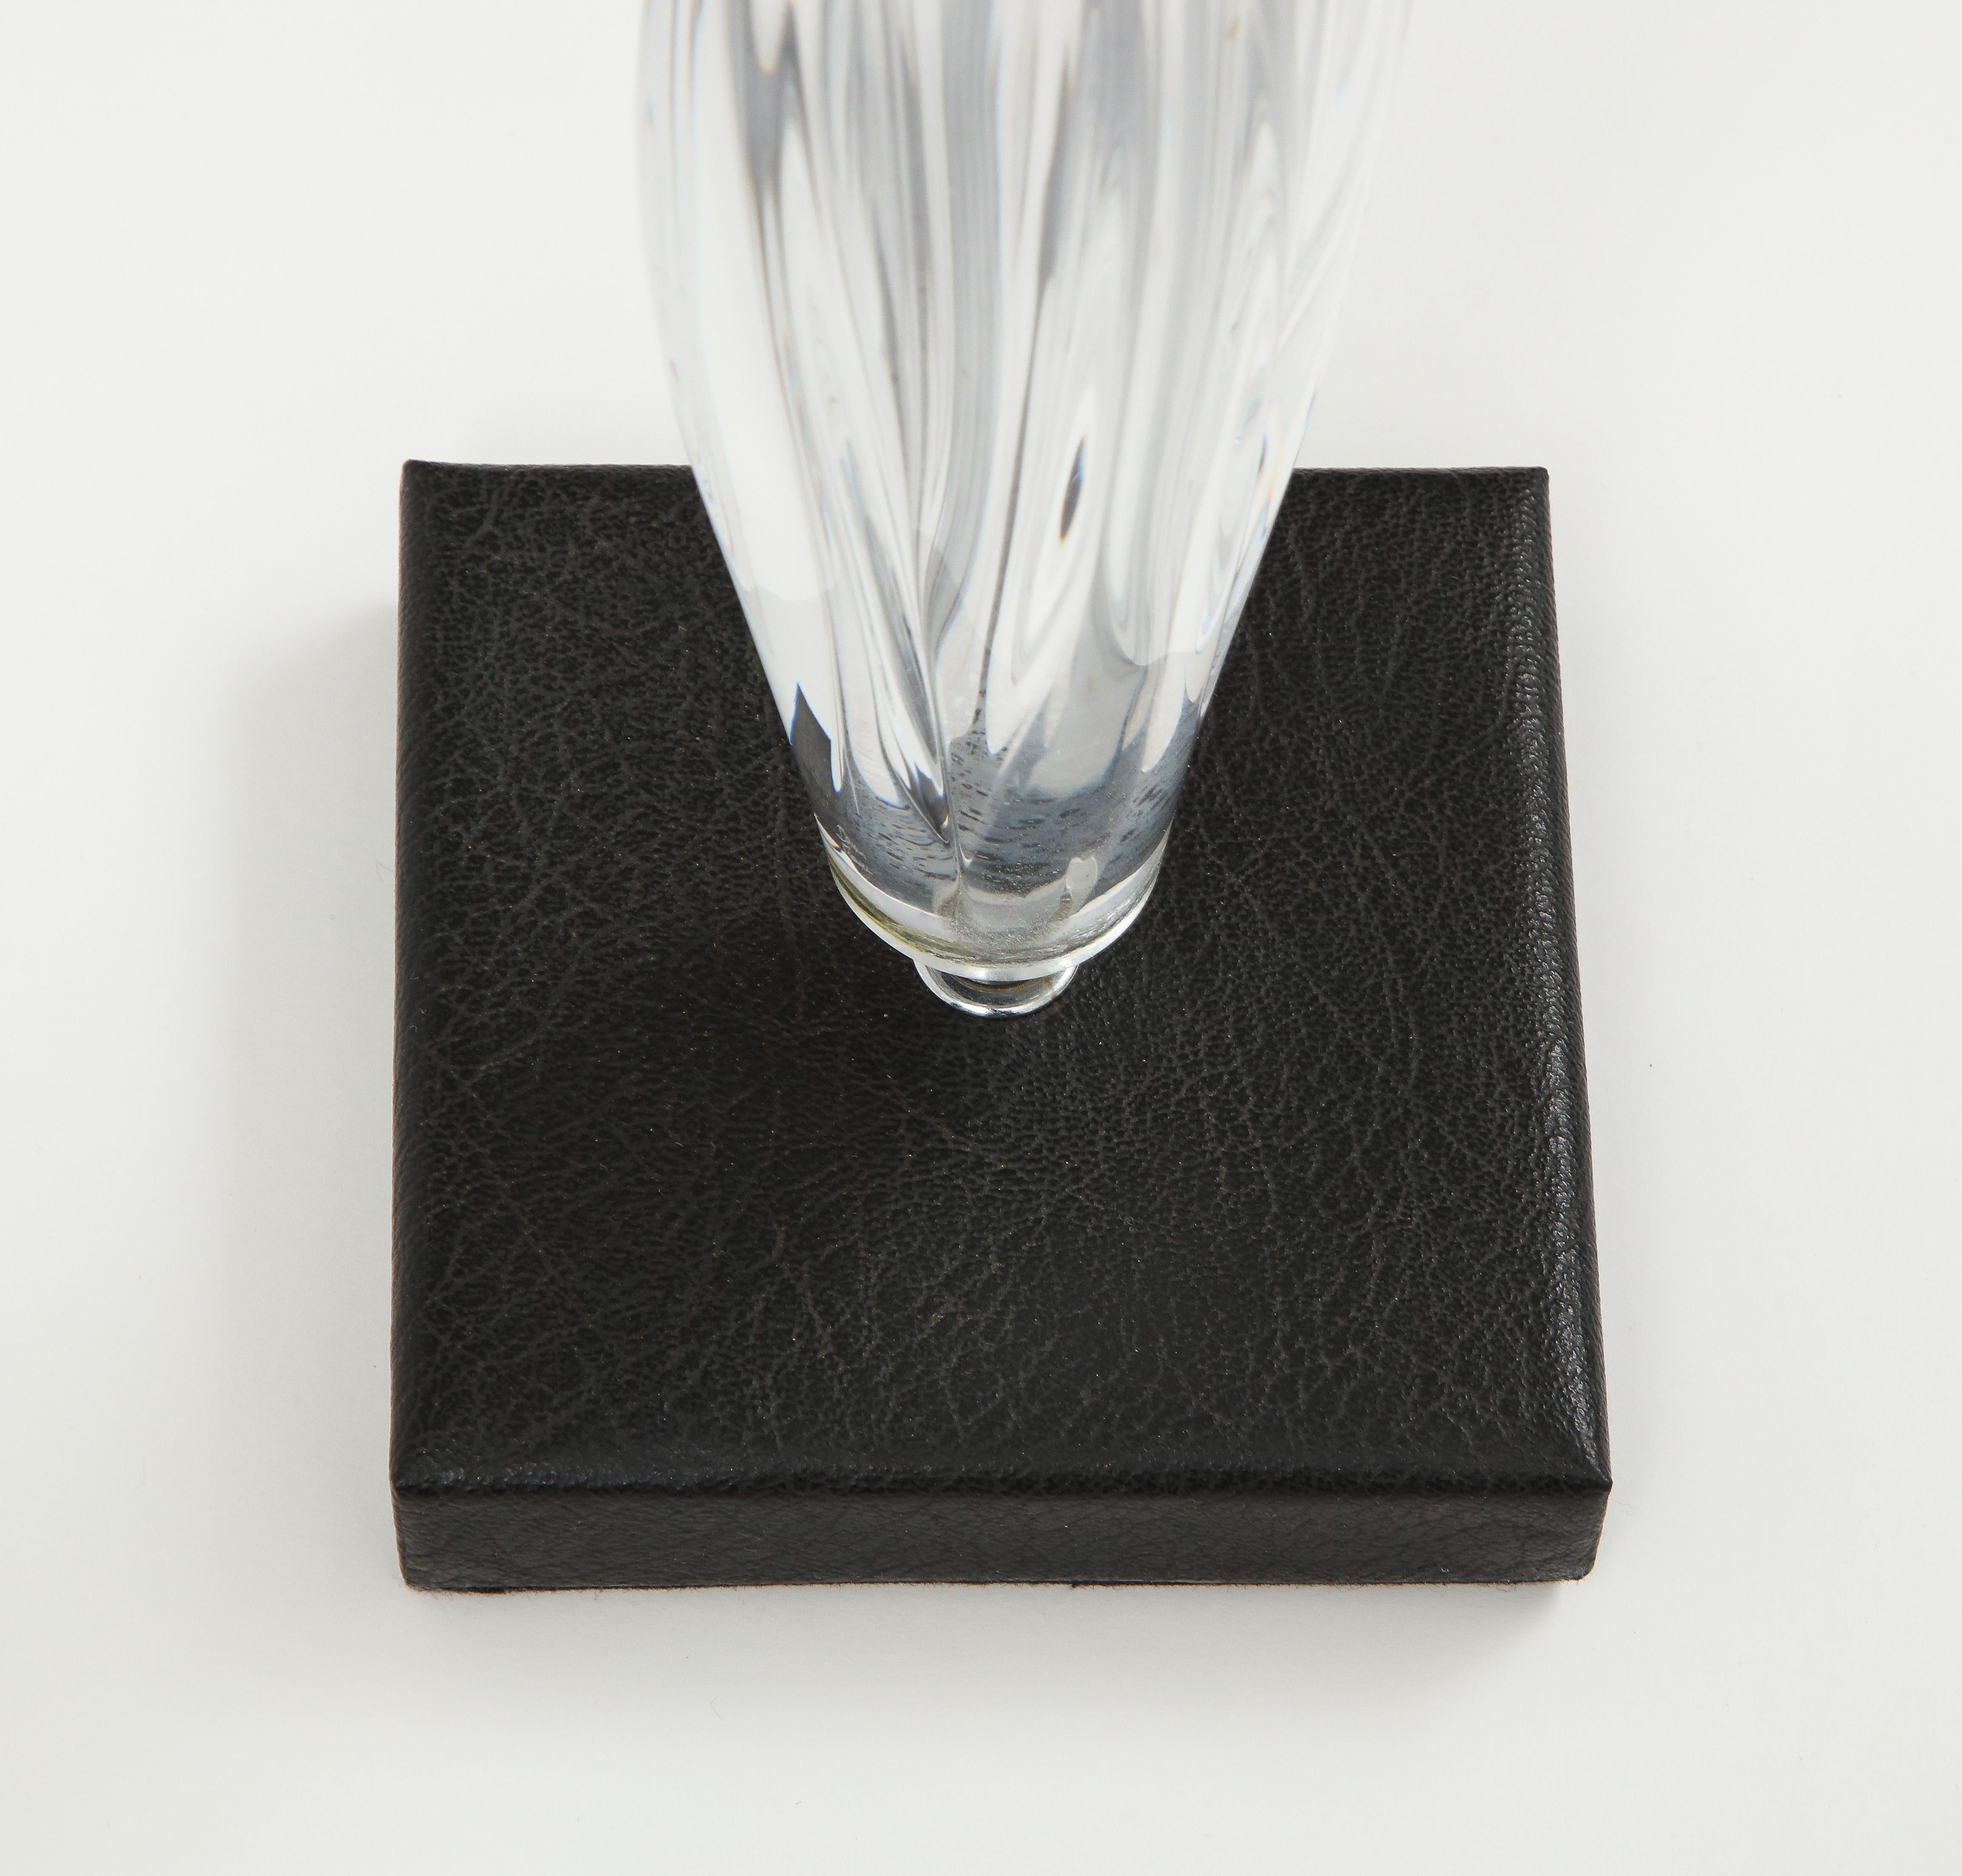 Minimalist Crystal Table Lamp by Daum Nancy, France, 1960's For Sale 4